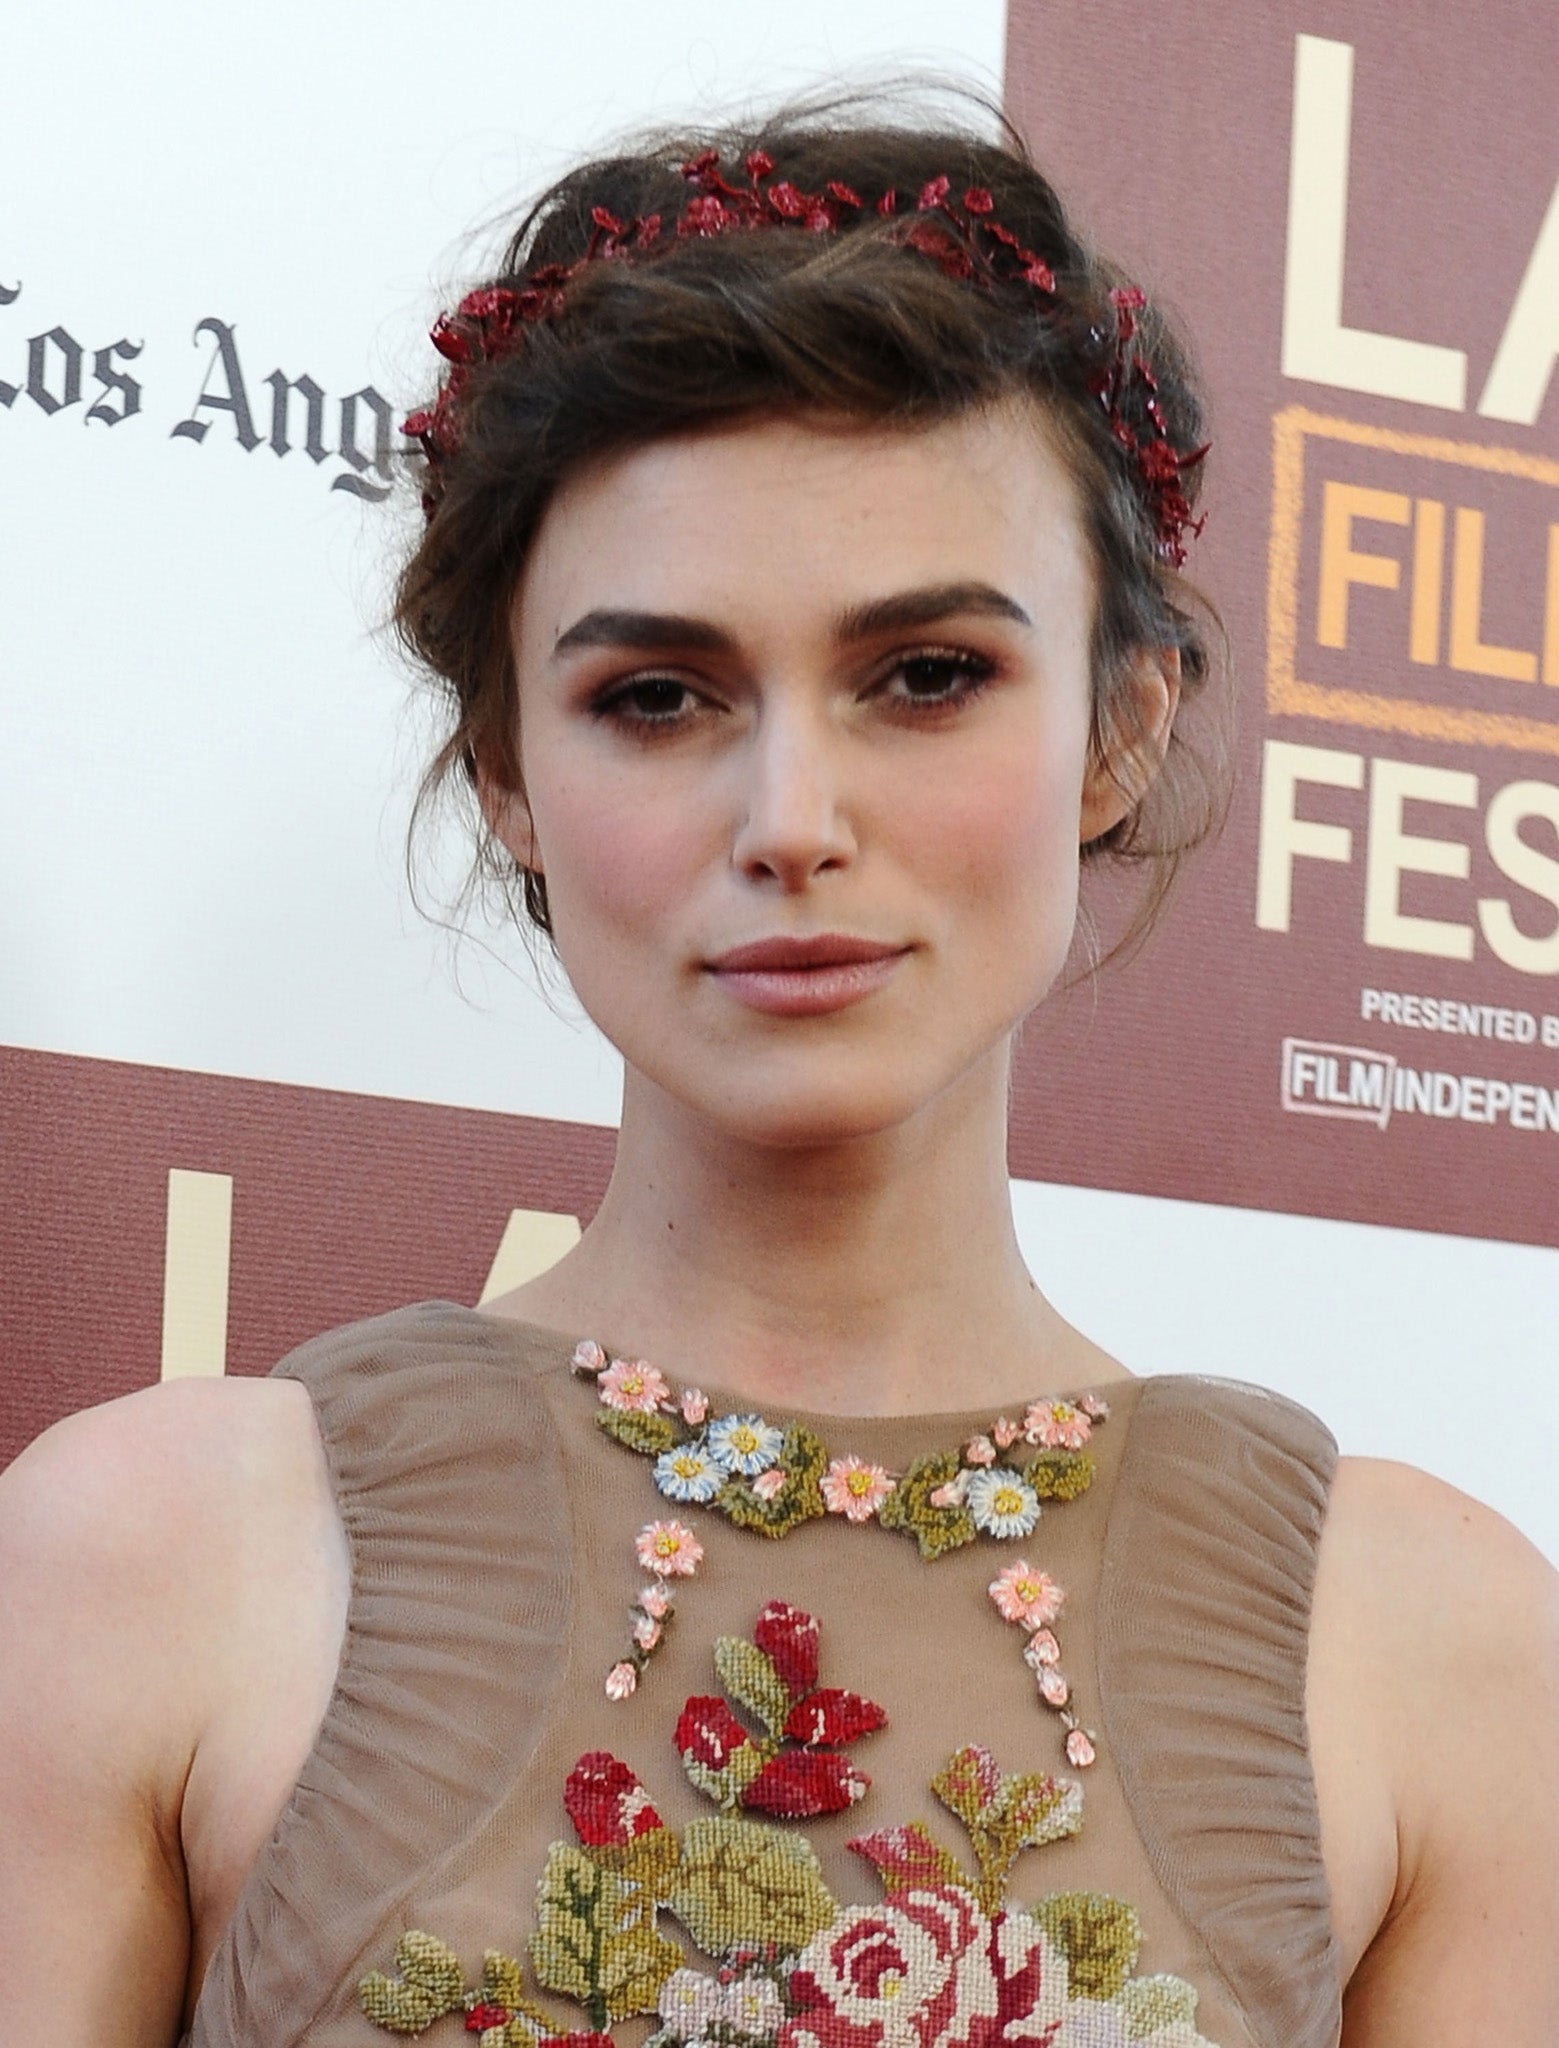 Keira Knightley pictured at a film premiere in June 2012